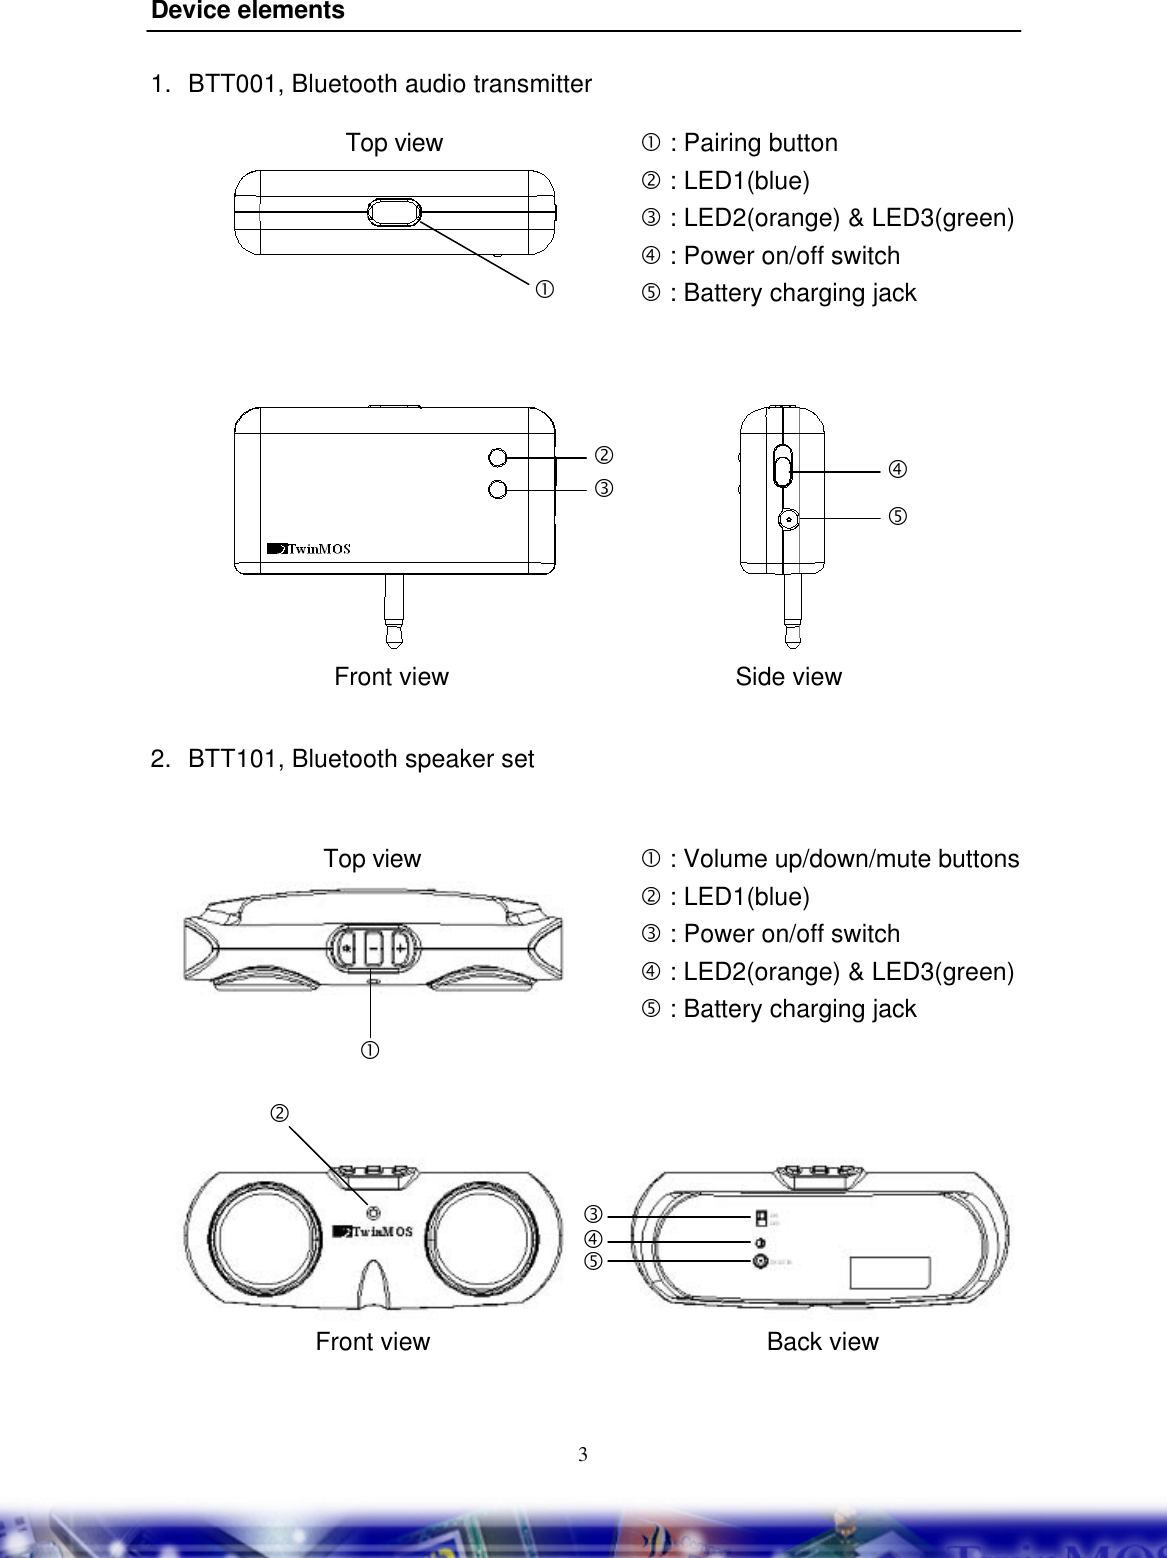    3Device elements  1. BTT001, Bluetooth audio transmitter    2. BTT101, Bluetooth speaker set    Top view Front view Side view •‚ƒ„…• : Pairing button ‚ : LED1(blue) ƒ : LED2(orange) &amp; LED3(green) „ : Power on/off switch … : Battery charging jack Top view Front view Back view •‚„…ƒ• : Volume up/down/mute buttons‚ : LED1(blue) ƒ : Power on/off switch „ : LED2(orange) &amp; LED3(green) … : Battery charging jack 